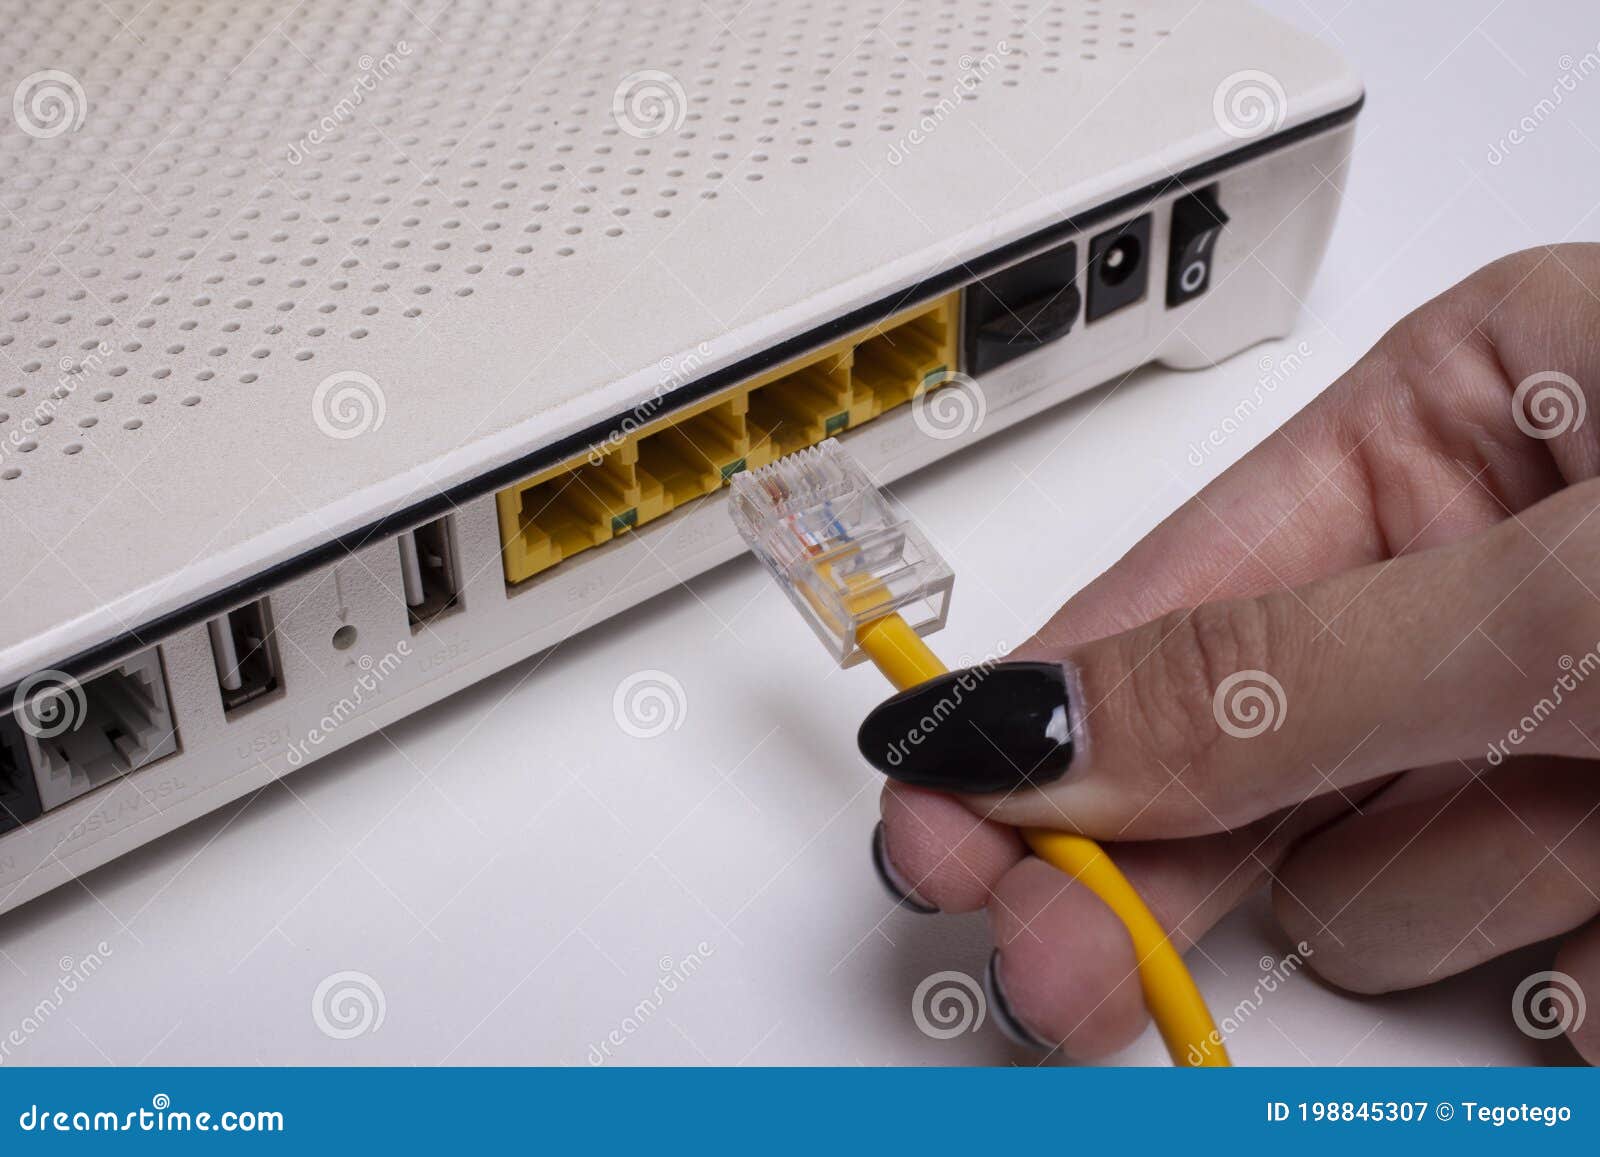 Internet and Ethernet Cable Stock Image - Image of ethernet, cable: 198845307